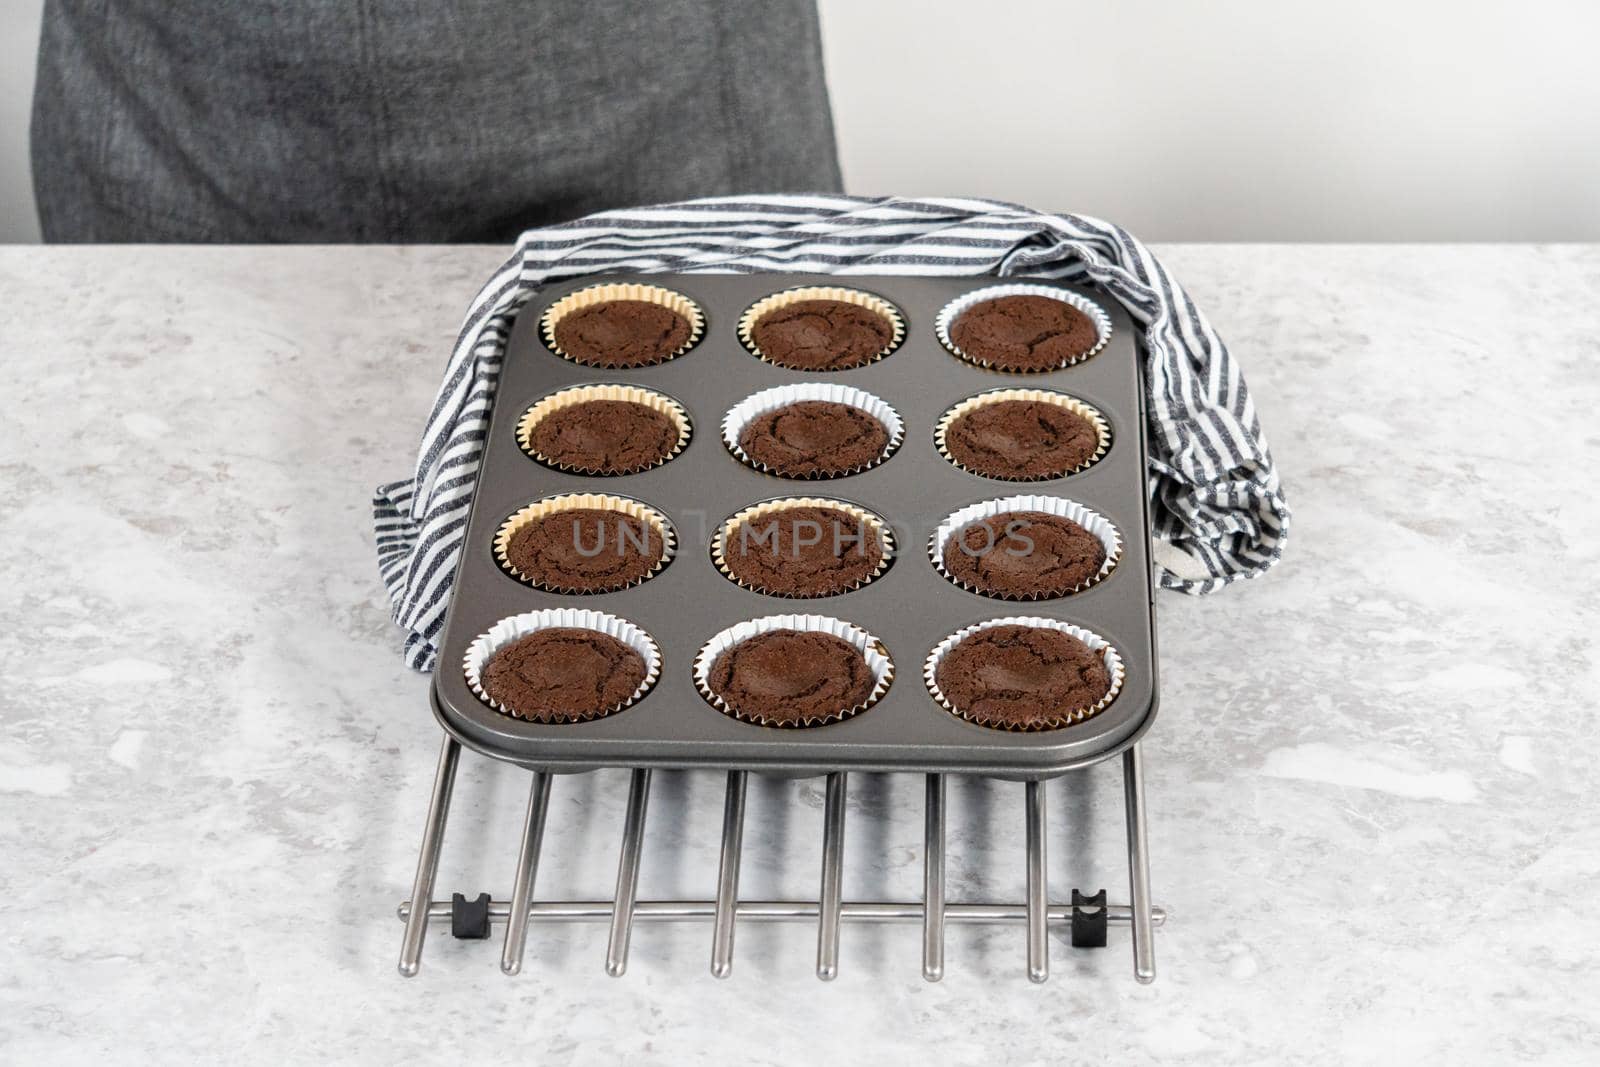 Cooling freshly baked s'mores cupcakes in a cupcake baking pan.